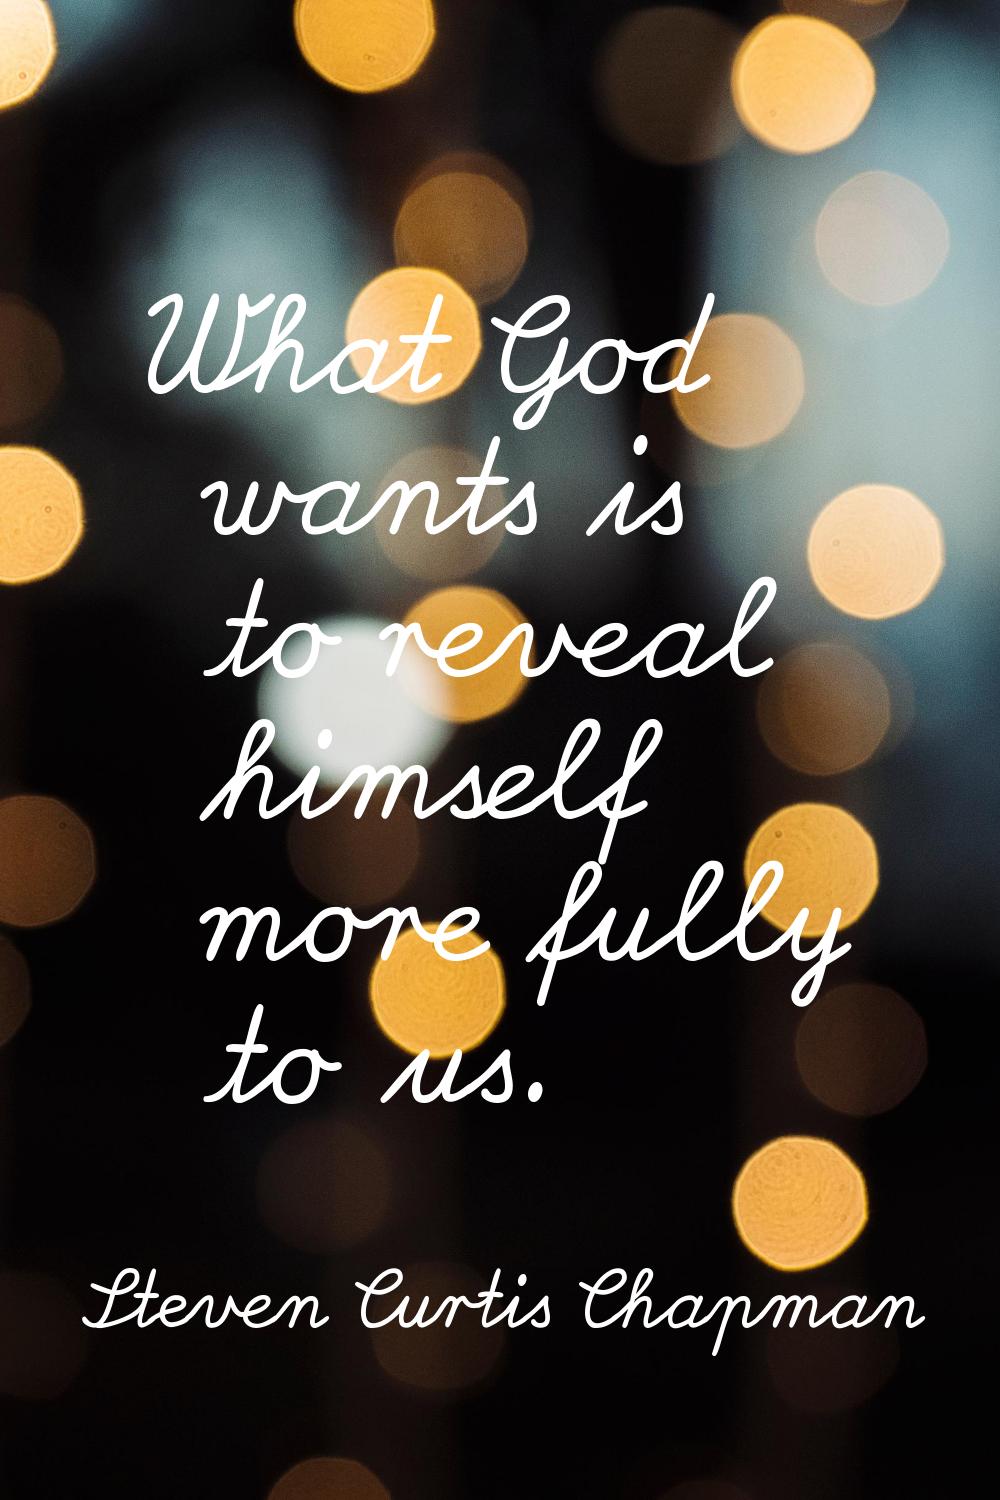 What God wants is to reveal himself more fully to us.